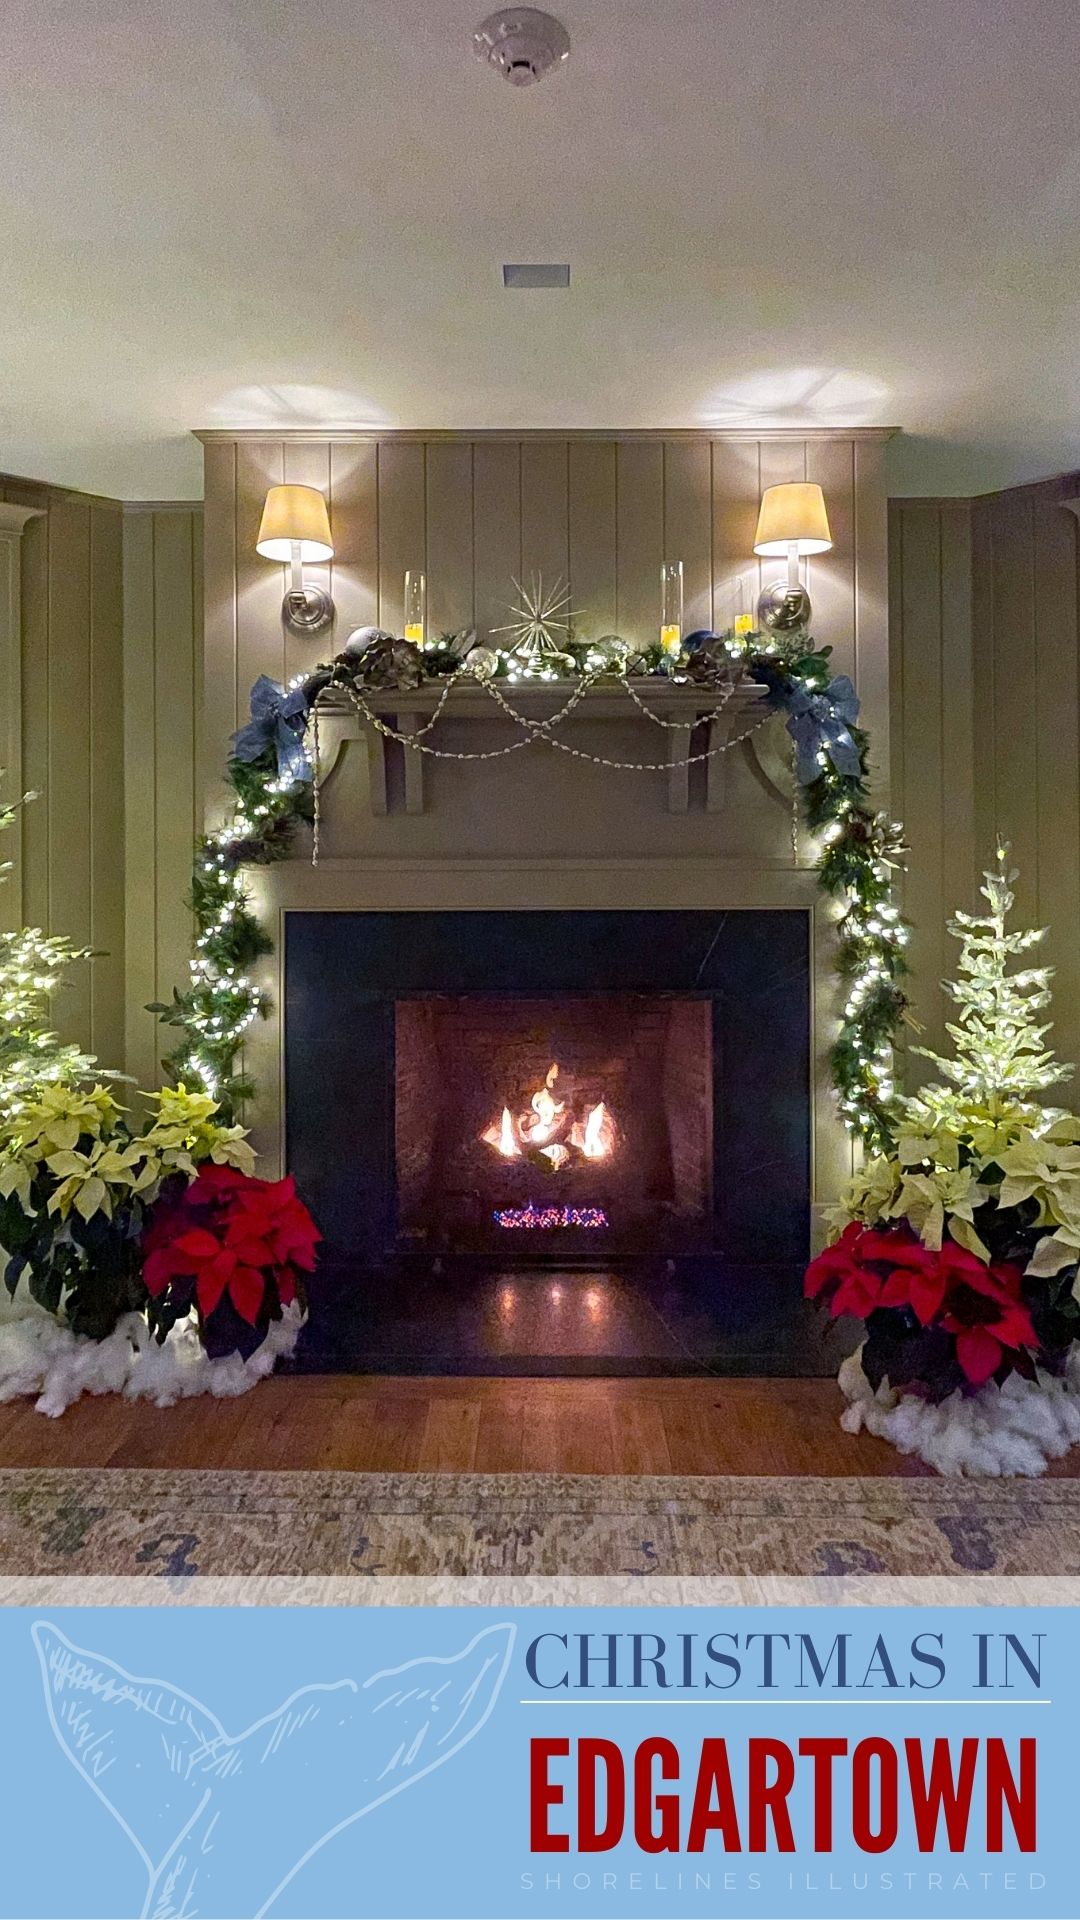 Celebrating Christmas in Edgartown on Marthas Vineyard at the Harbor View Hotel